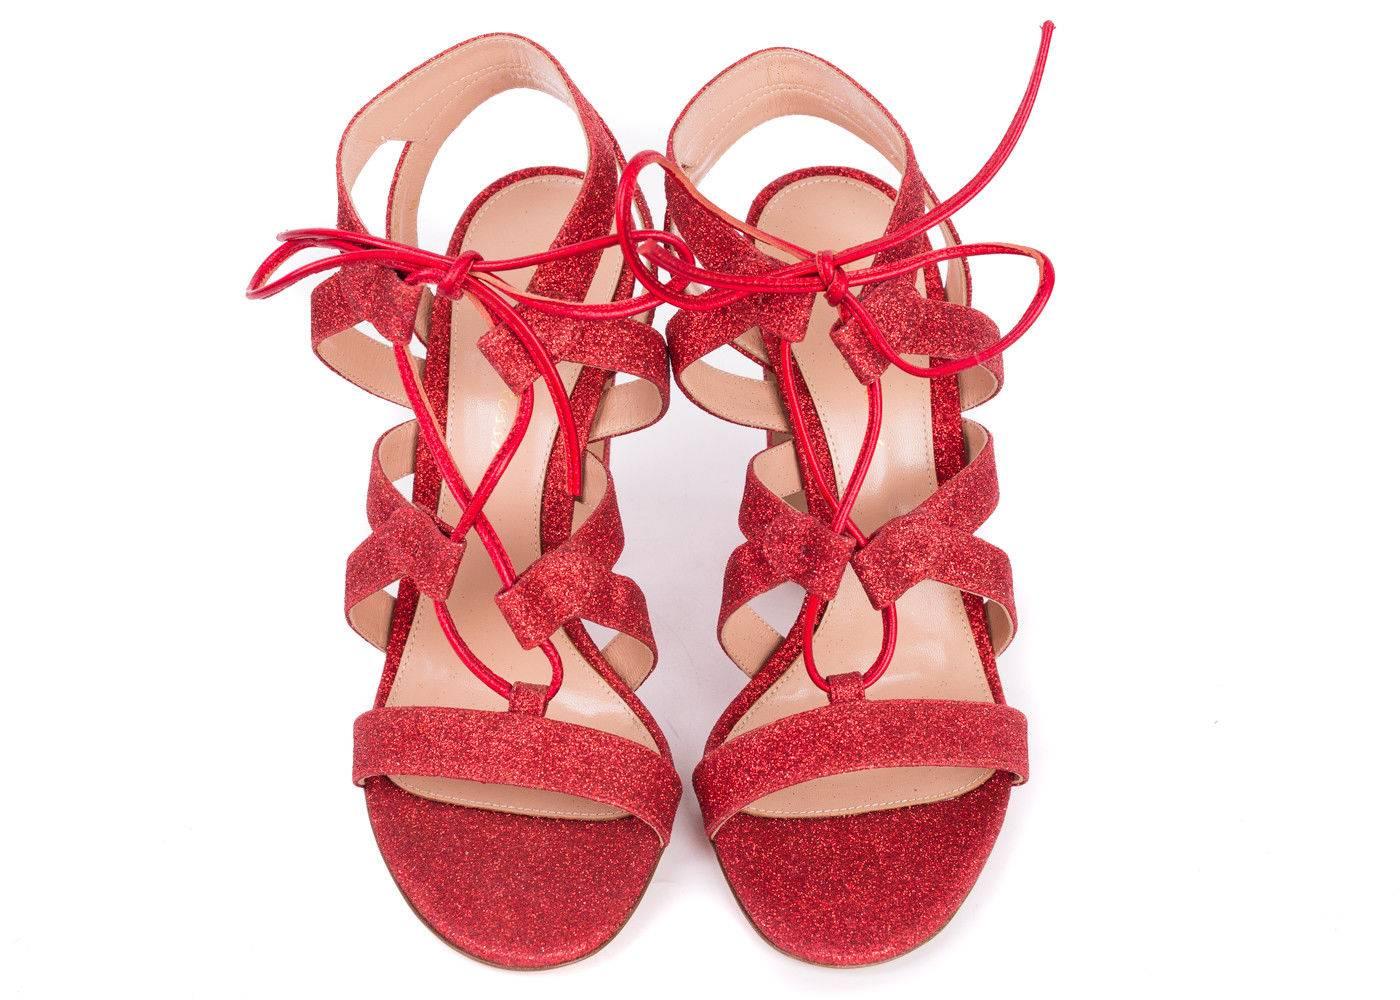 Men's Gianvito Rossi Red Glitter Caged Lace Up Sandal Heels For Sale